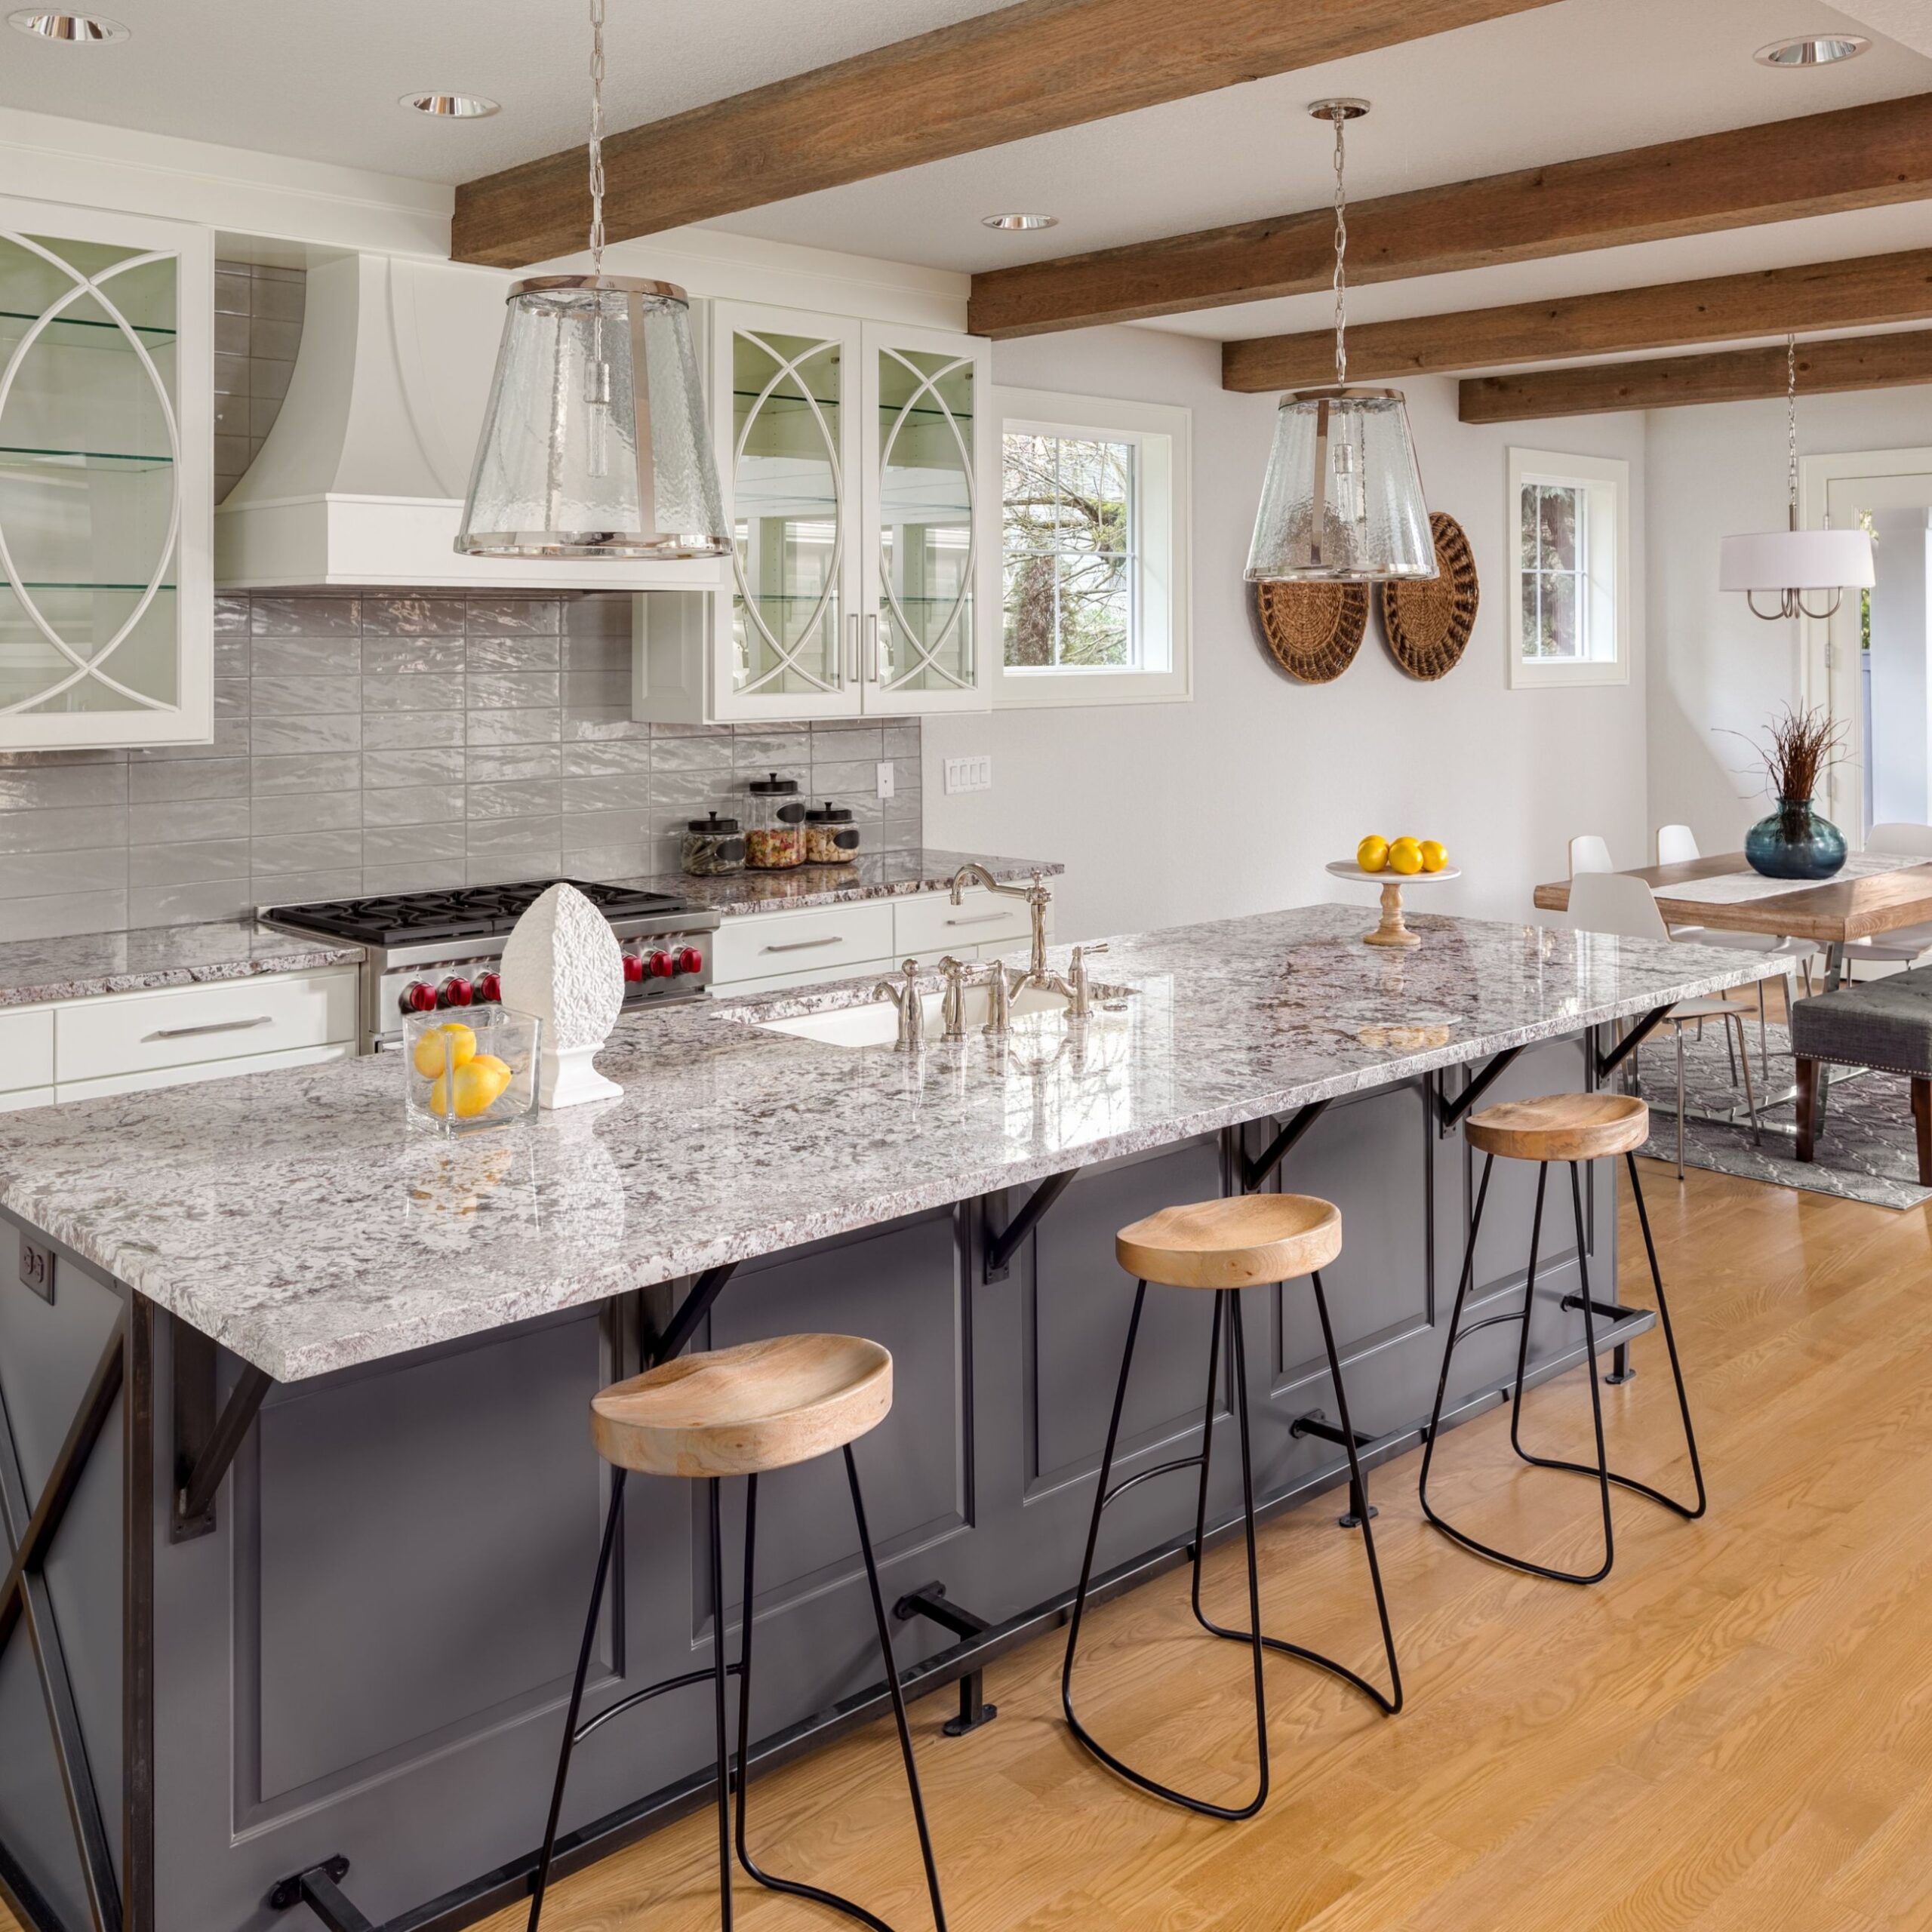 8 Granite Countertop Color Options for Your Kitchen - what color granite countertops go with white cabinets?